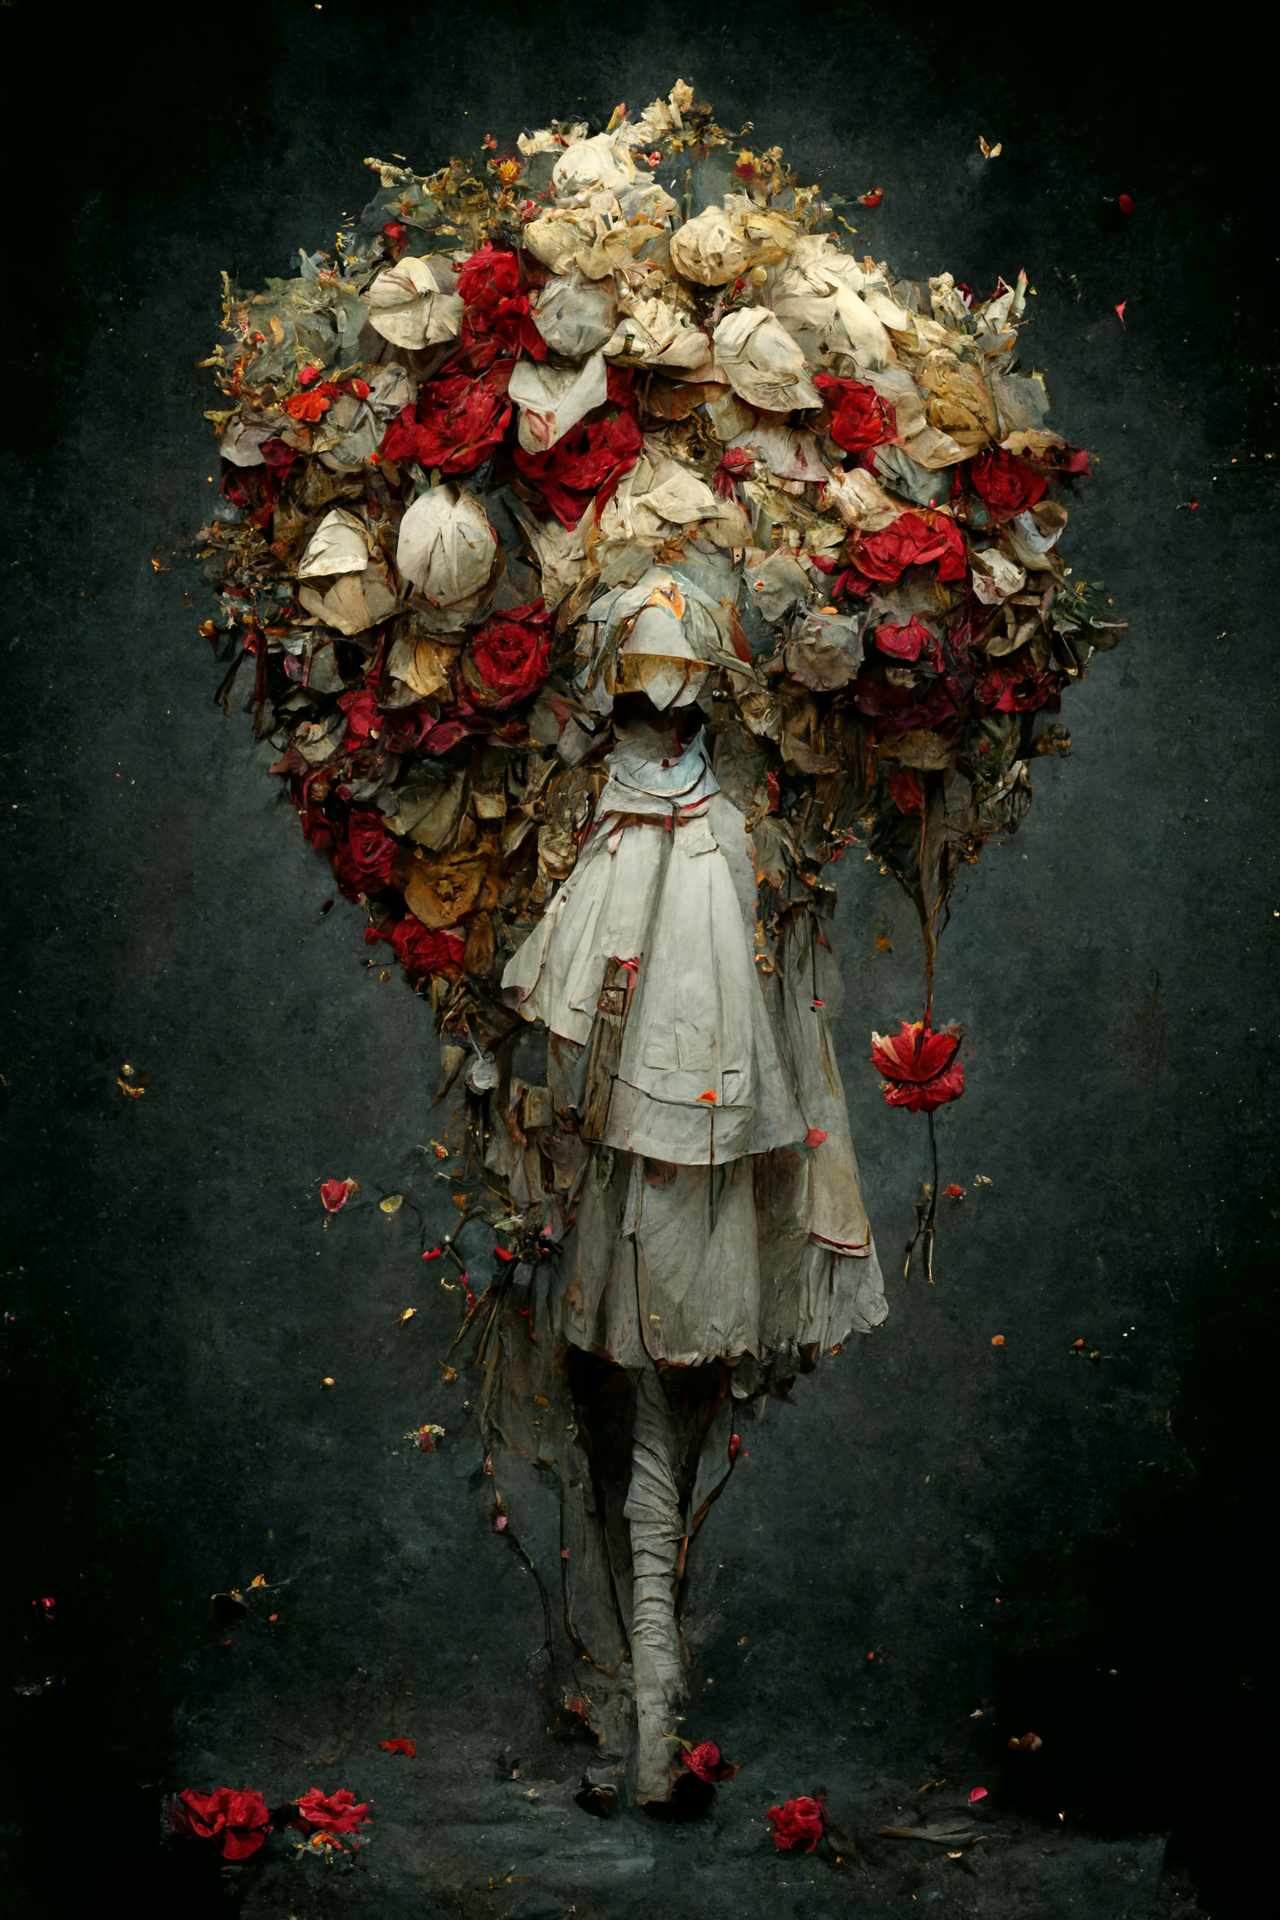 sedetweiler.com_Alice_in_Wonderland_standing_on_red_heart_shape_a43694e0-2791-4ccc-9c3e-82355f7d8c7f.png